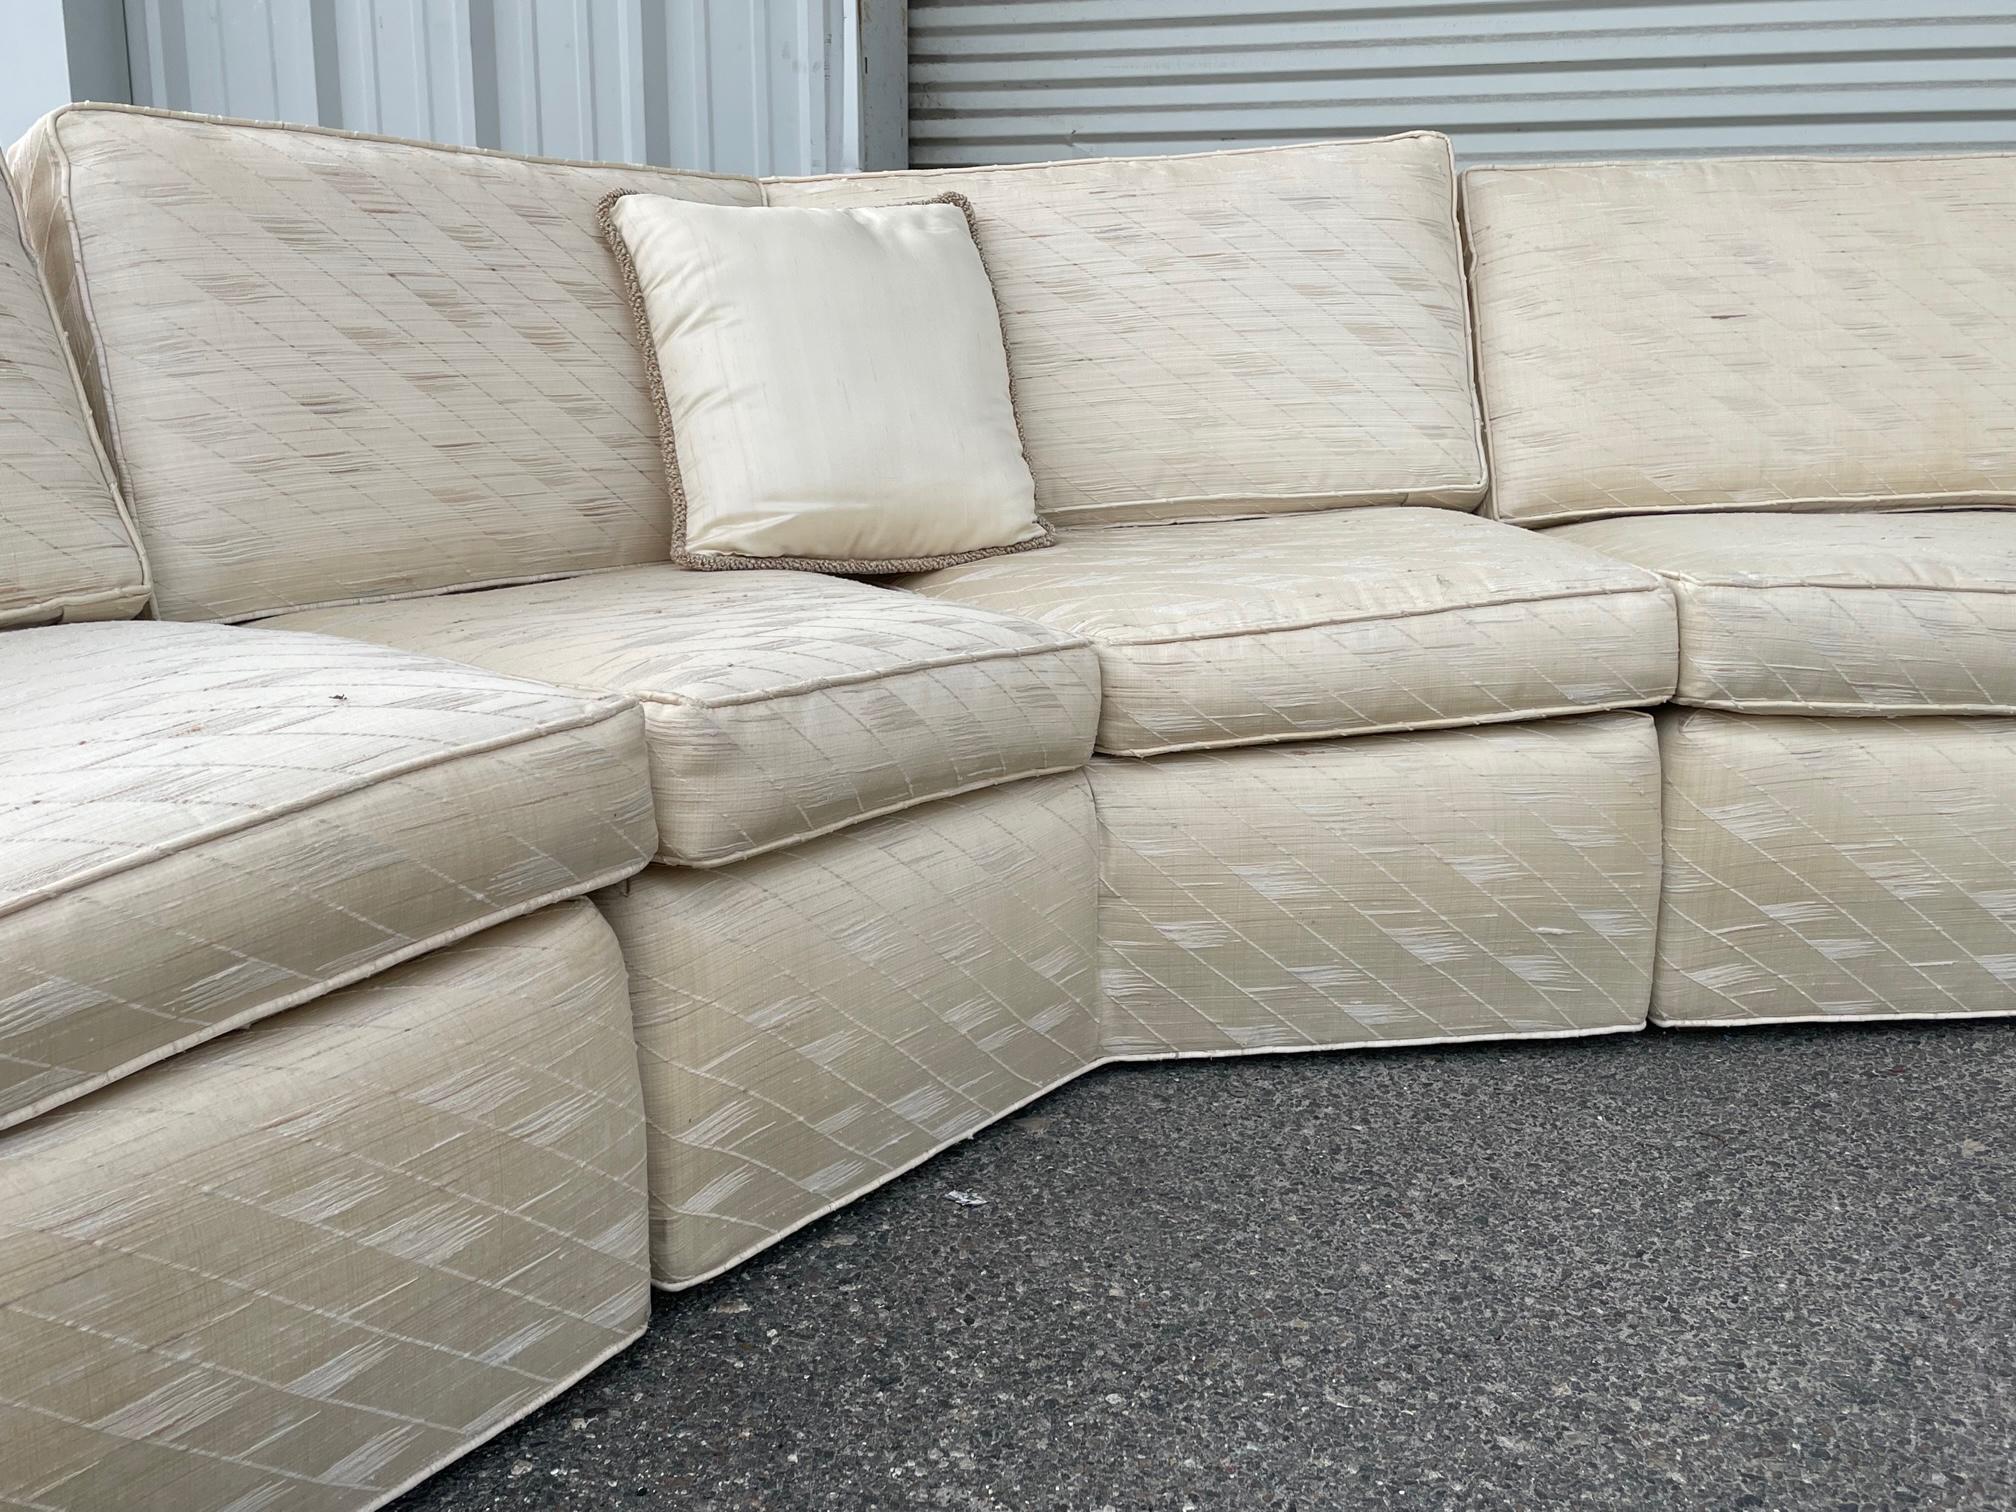 Hollywood Regency Curved Circular Sectional Sofa in the Manner of Milo Baughman For Sale